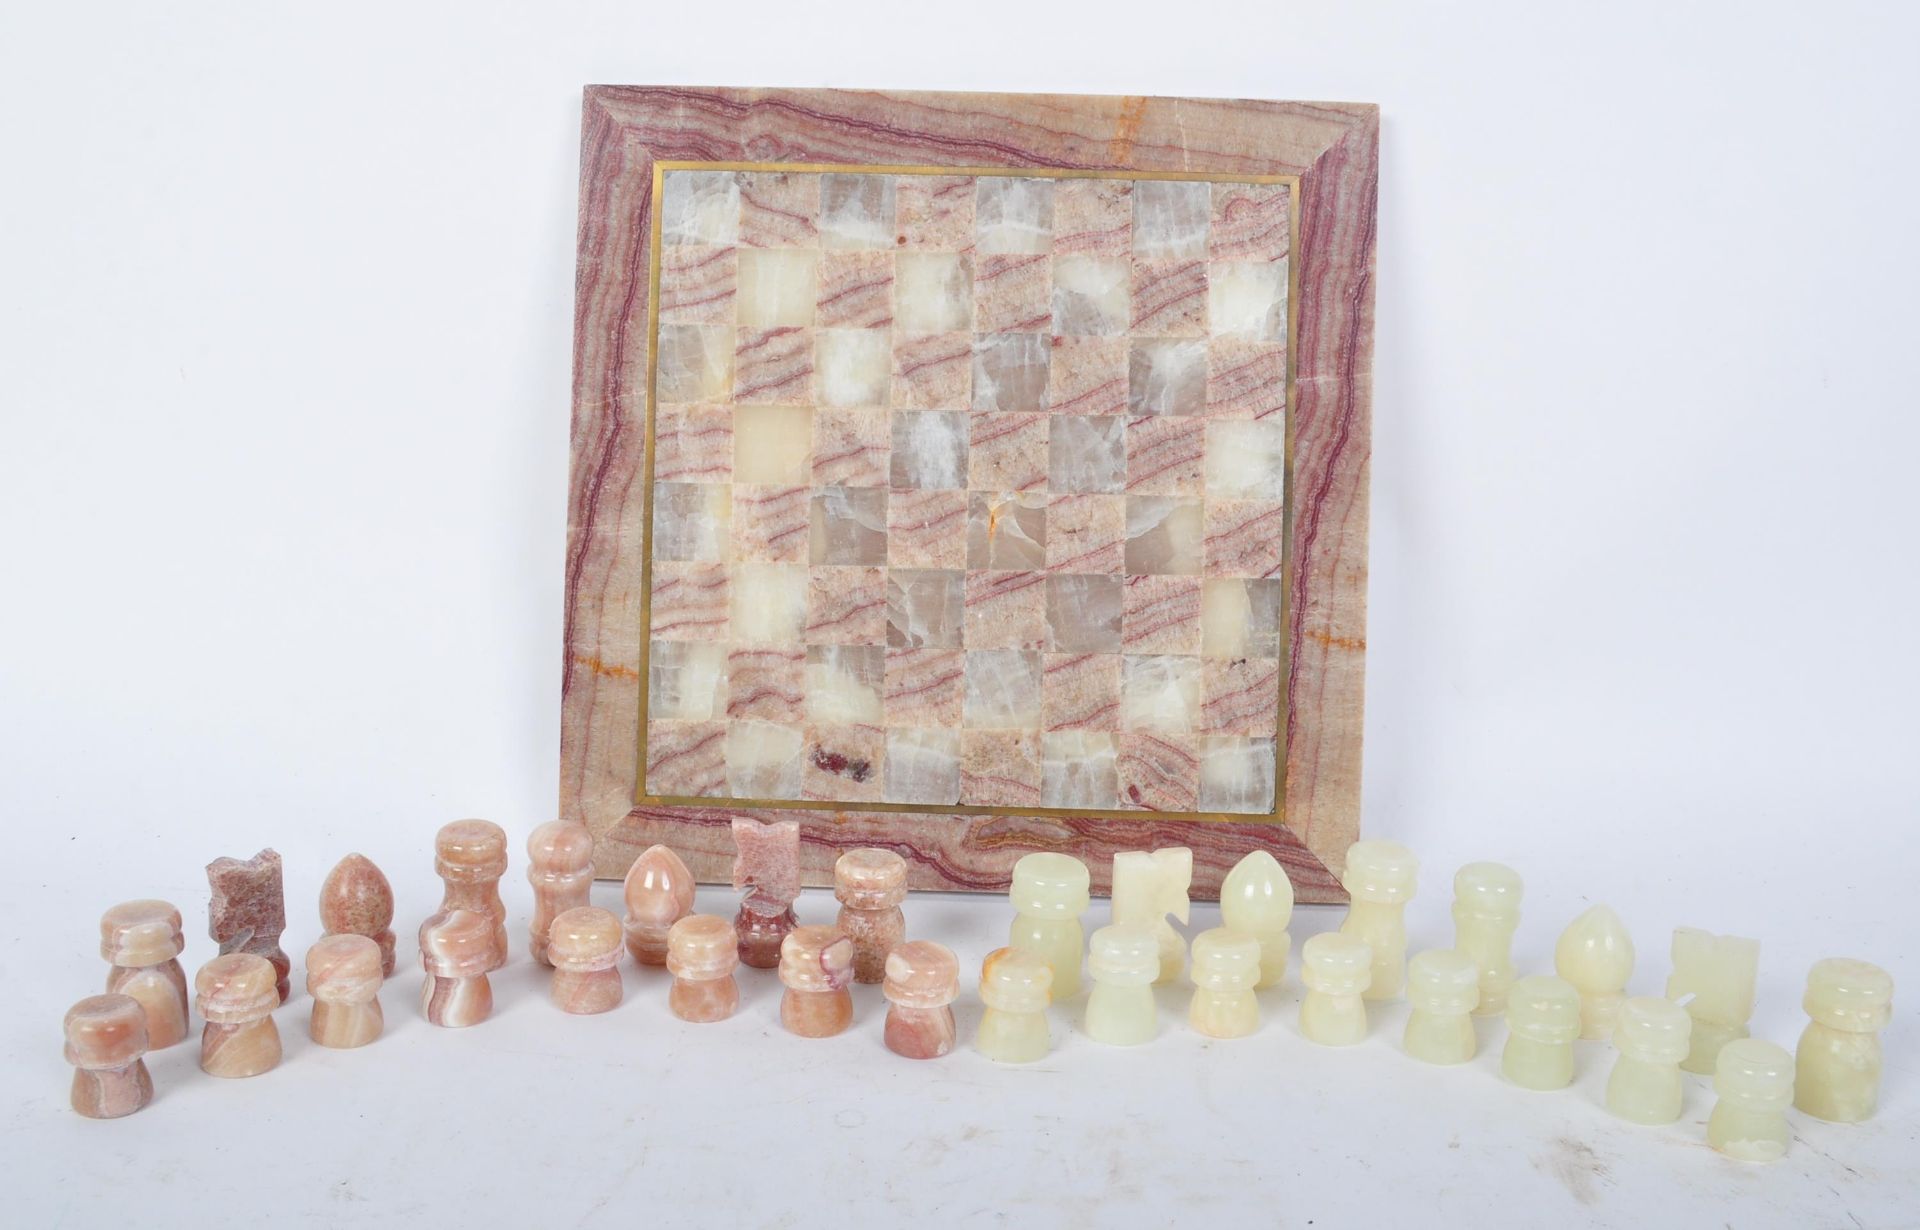 VINTAGE 20TH CENTURY ONYX CHESS SET AND BOARD